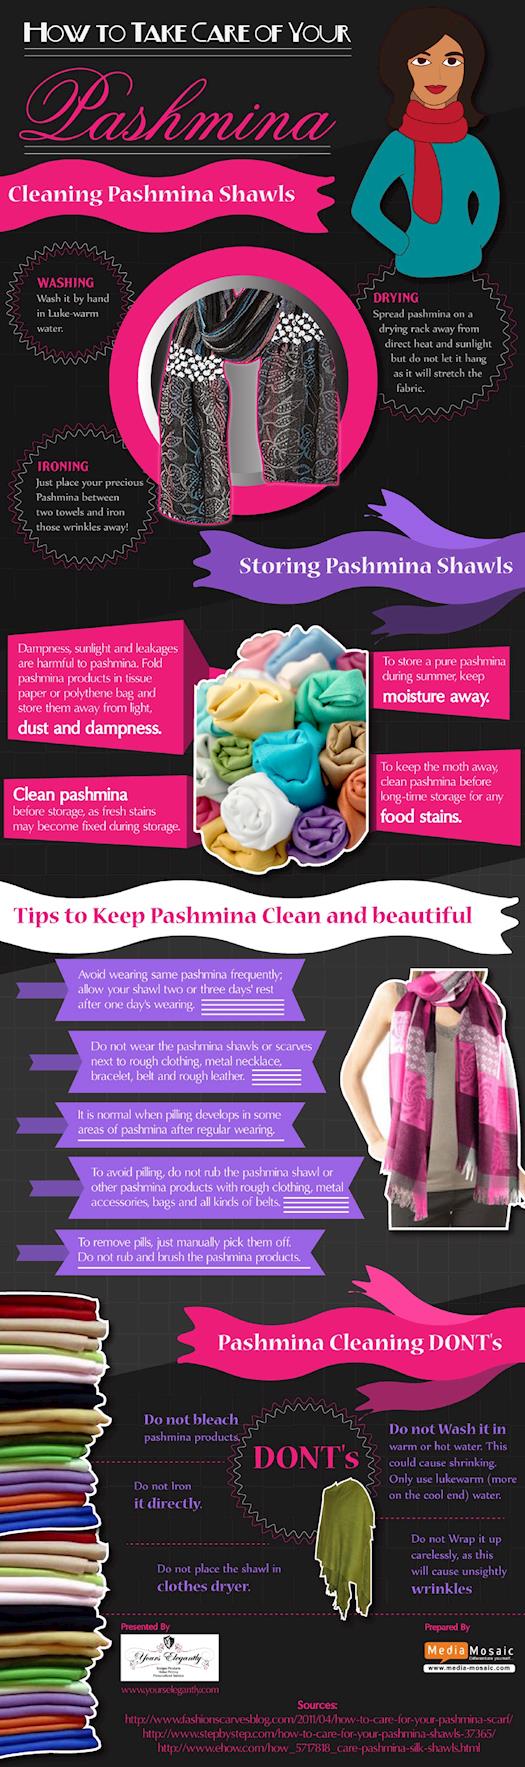 How to Take Care of Your Pashmina [Infographic]